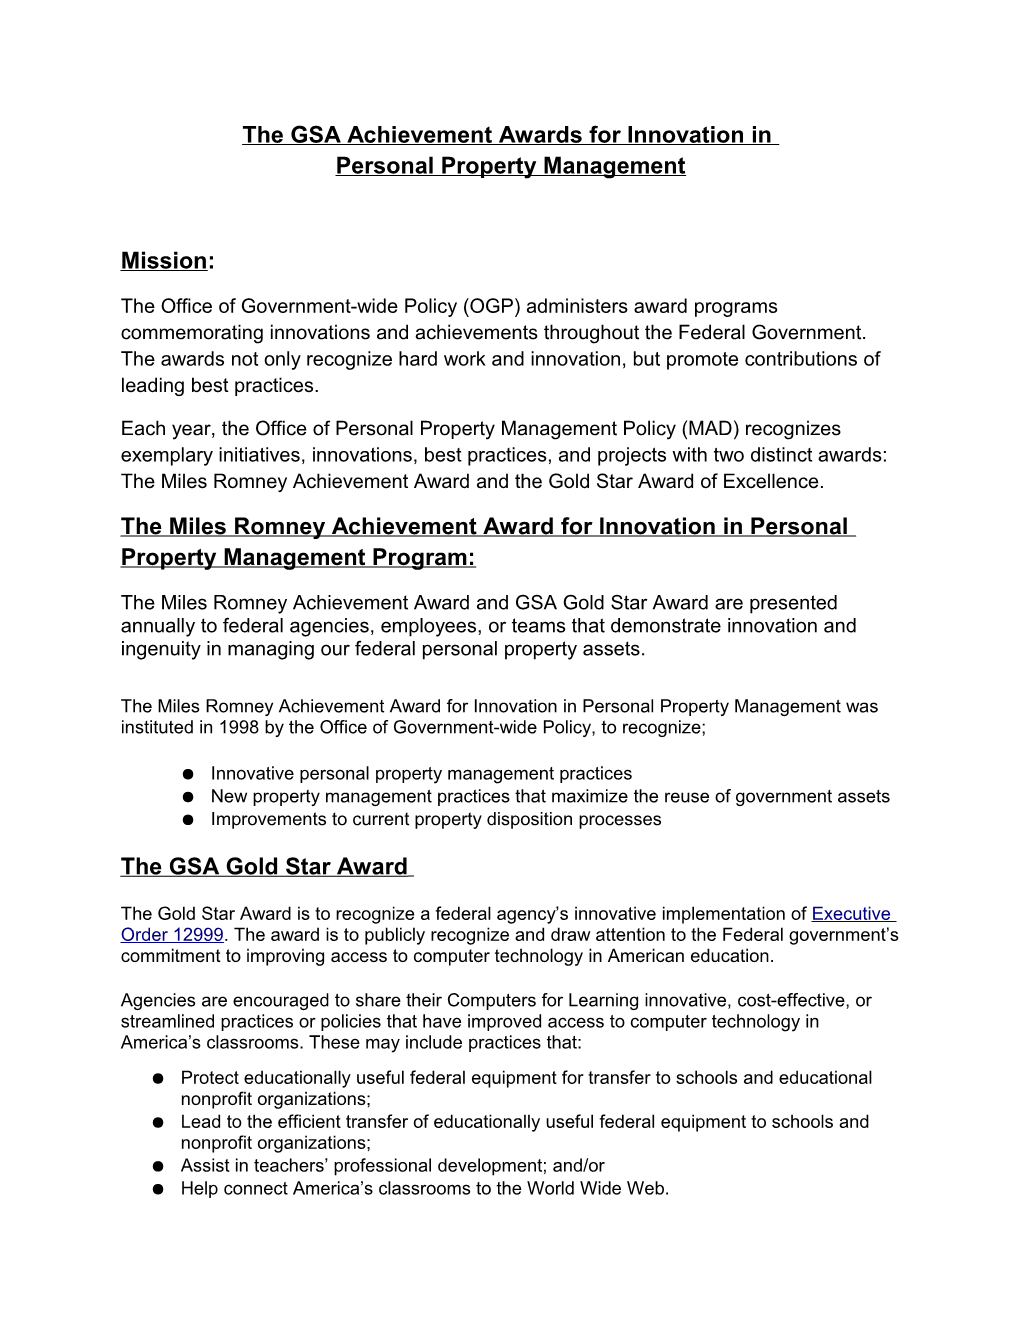 The GSA Achievement Awards for Innovation in Personal Property Management